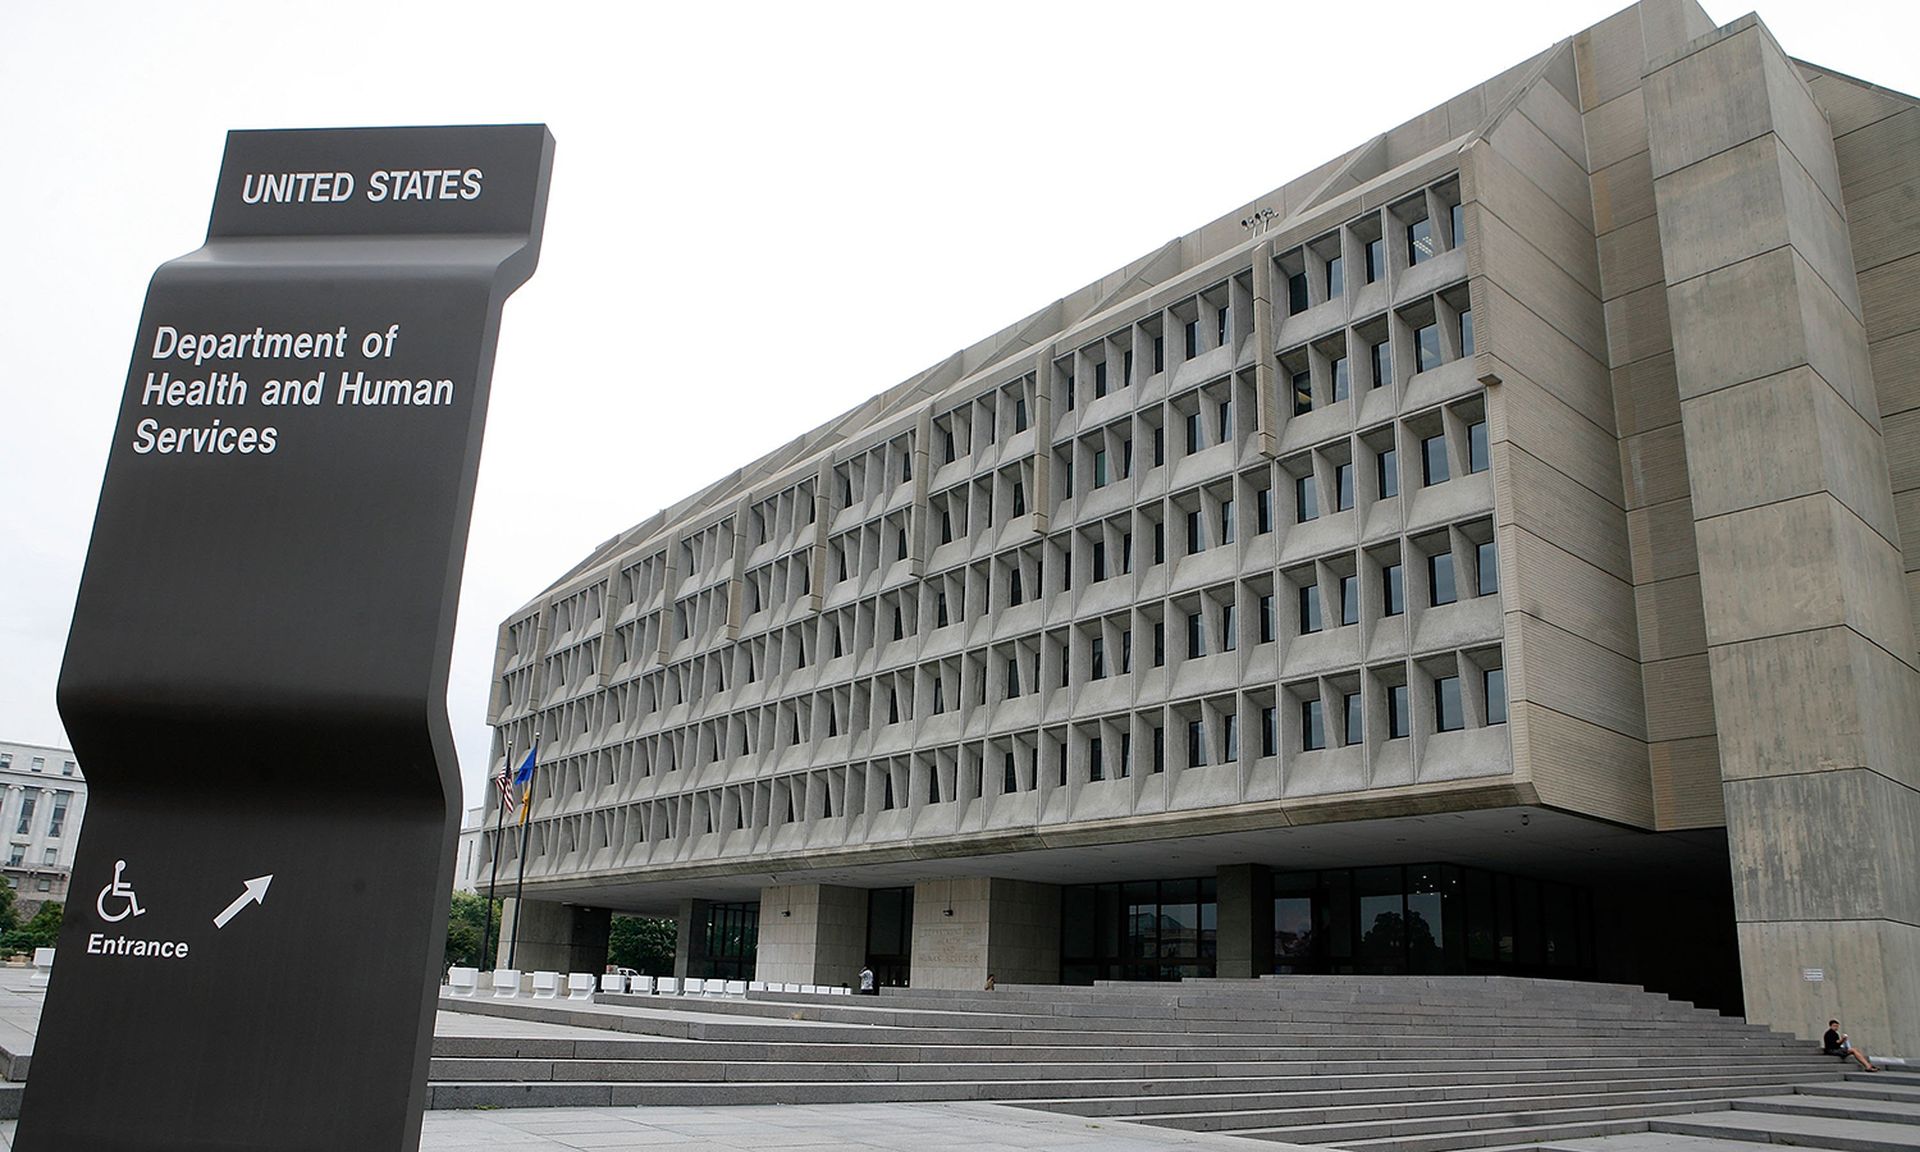 The exterior of the U.S. Department of Health and Human Services